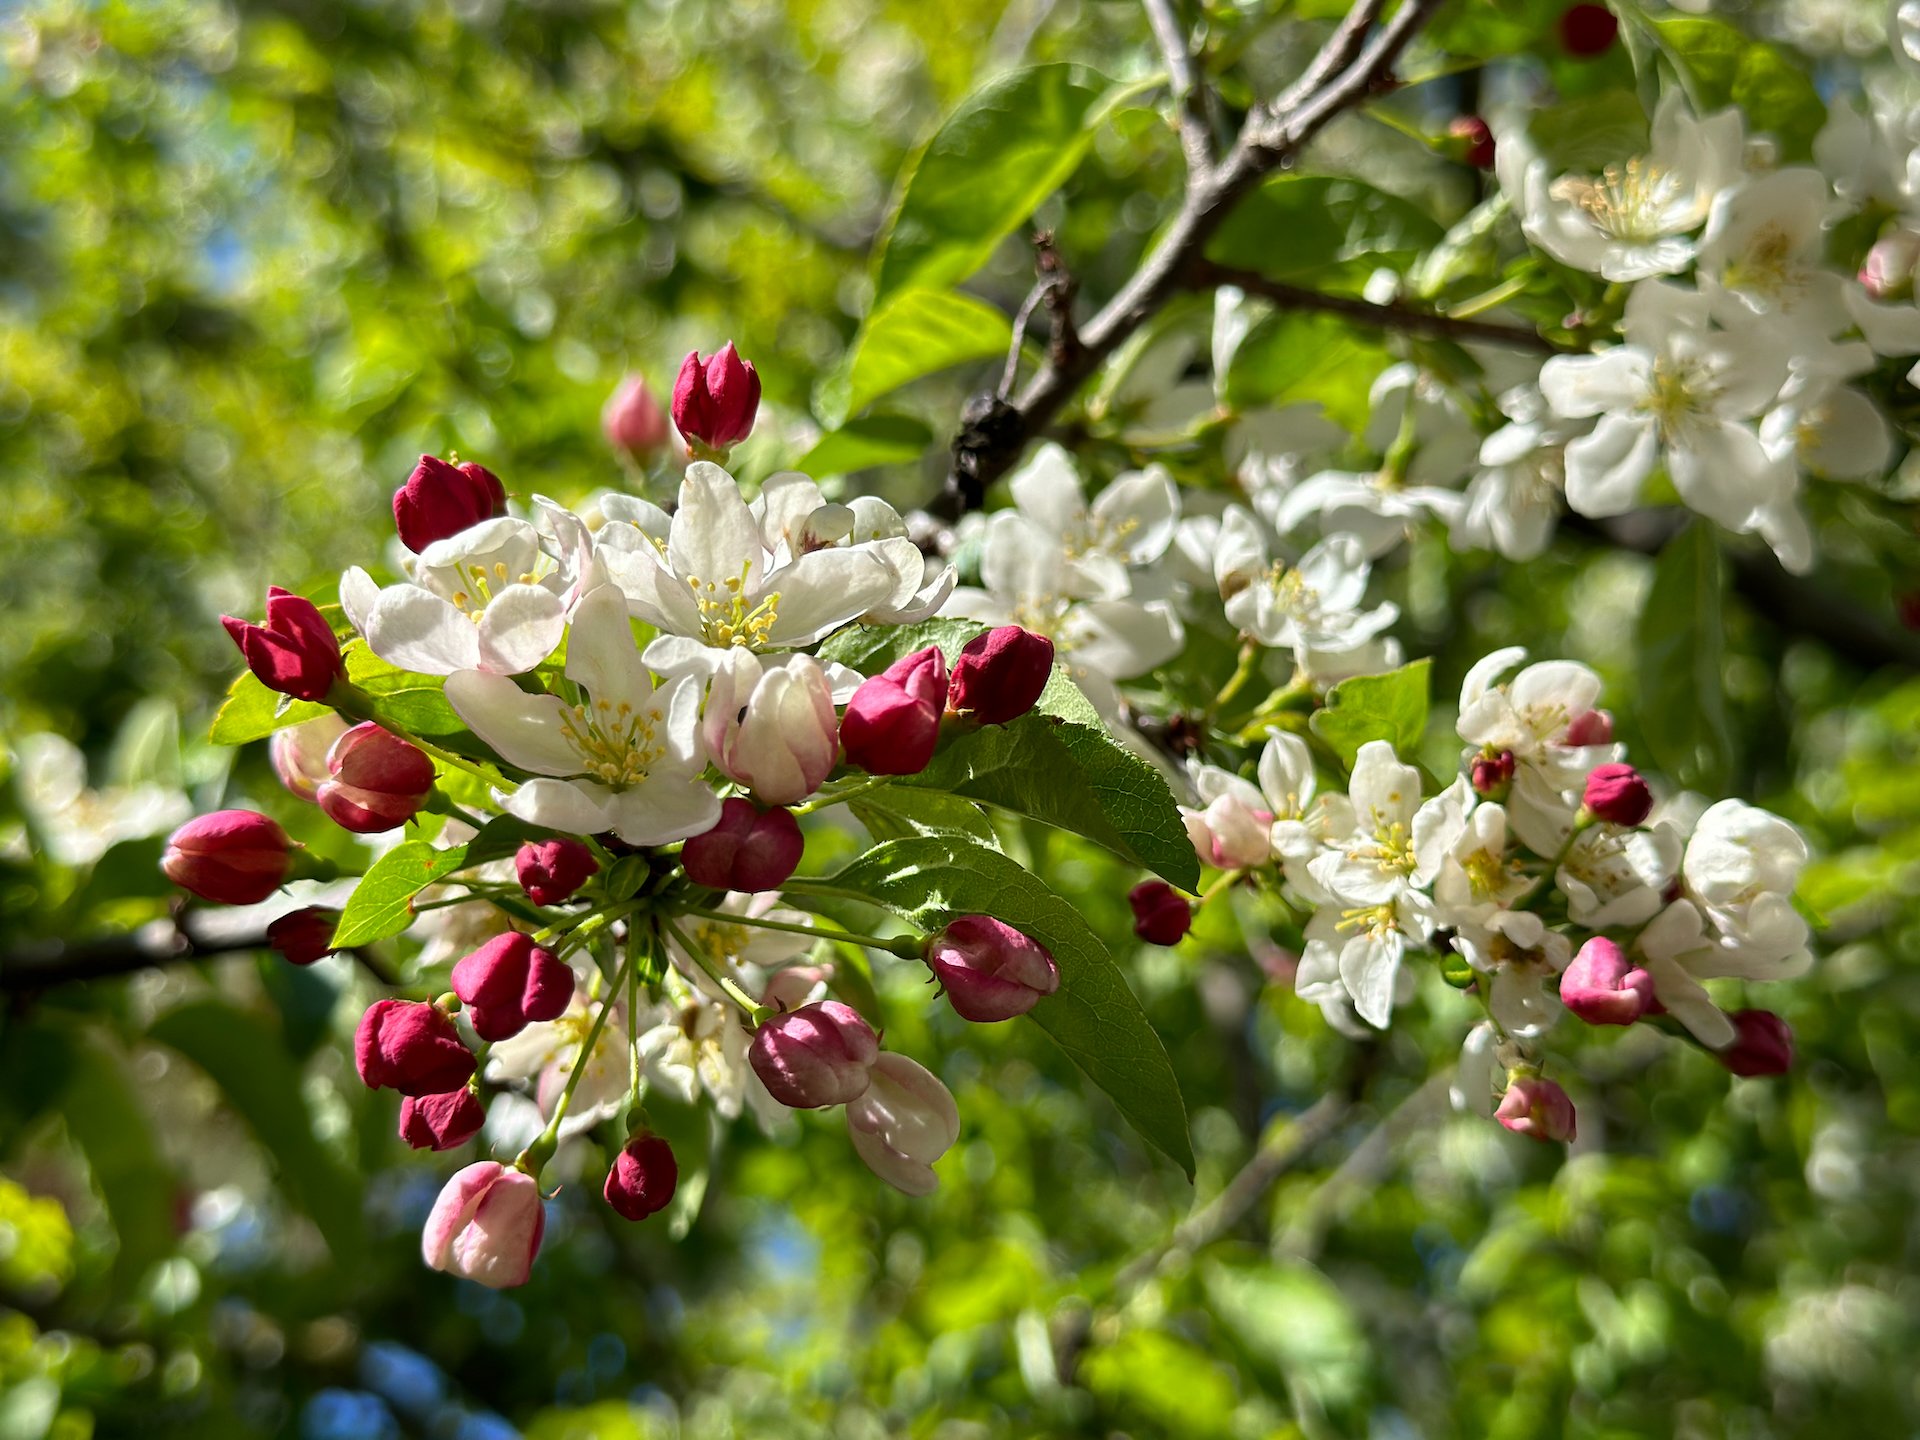  Apple blossoms - I hope this means our apple trees on the island will still be in bloom when we get back.  